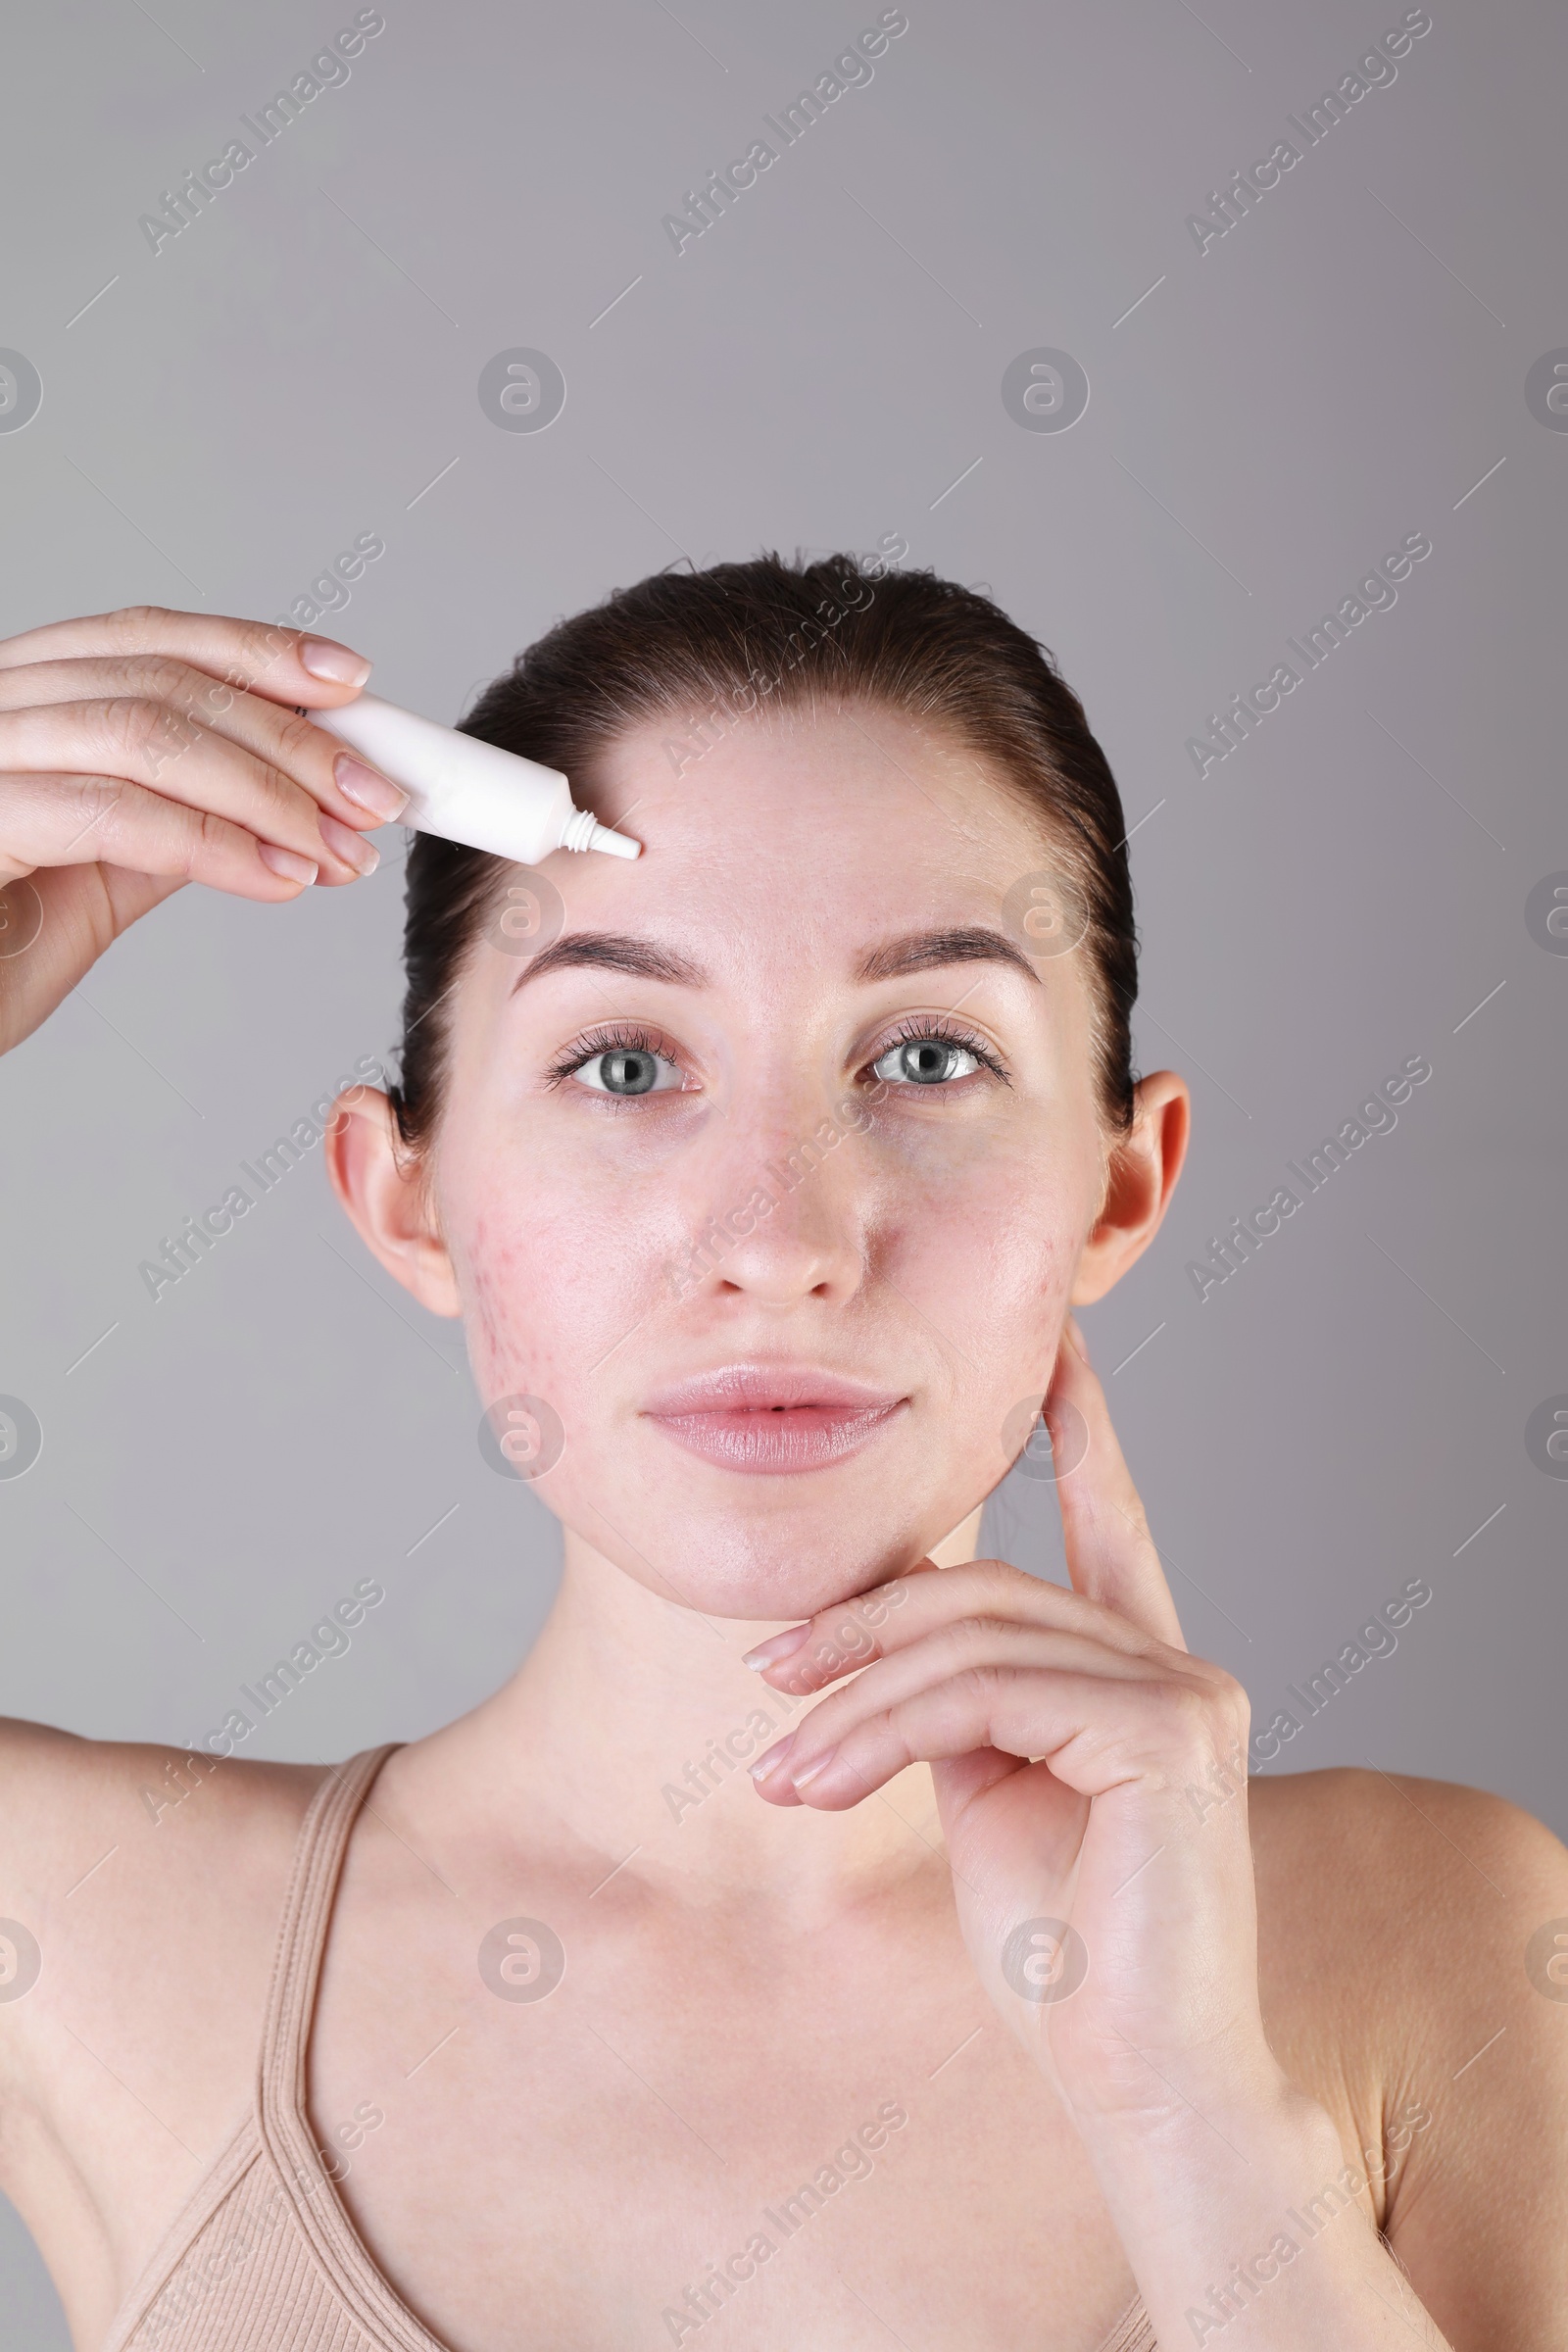 Photo of Young woman with acne problem applying cosmetic product onto her skin on light grey background